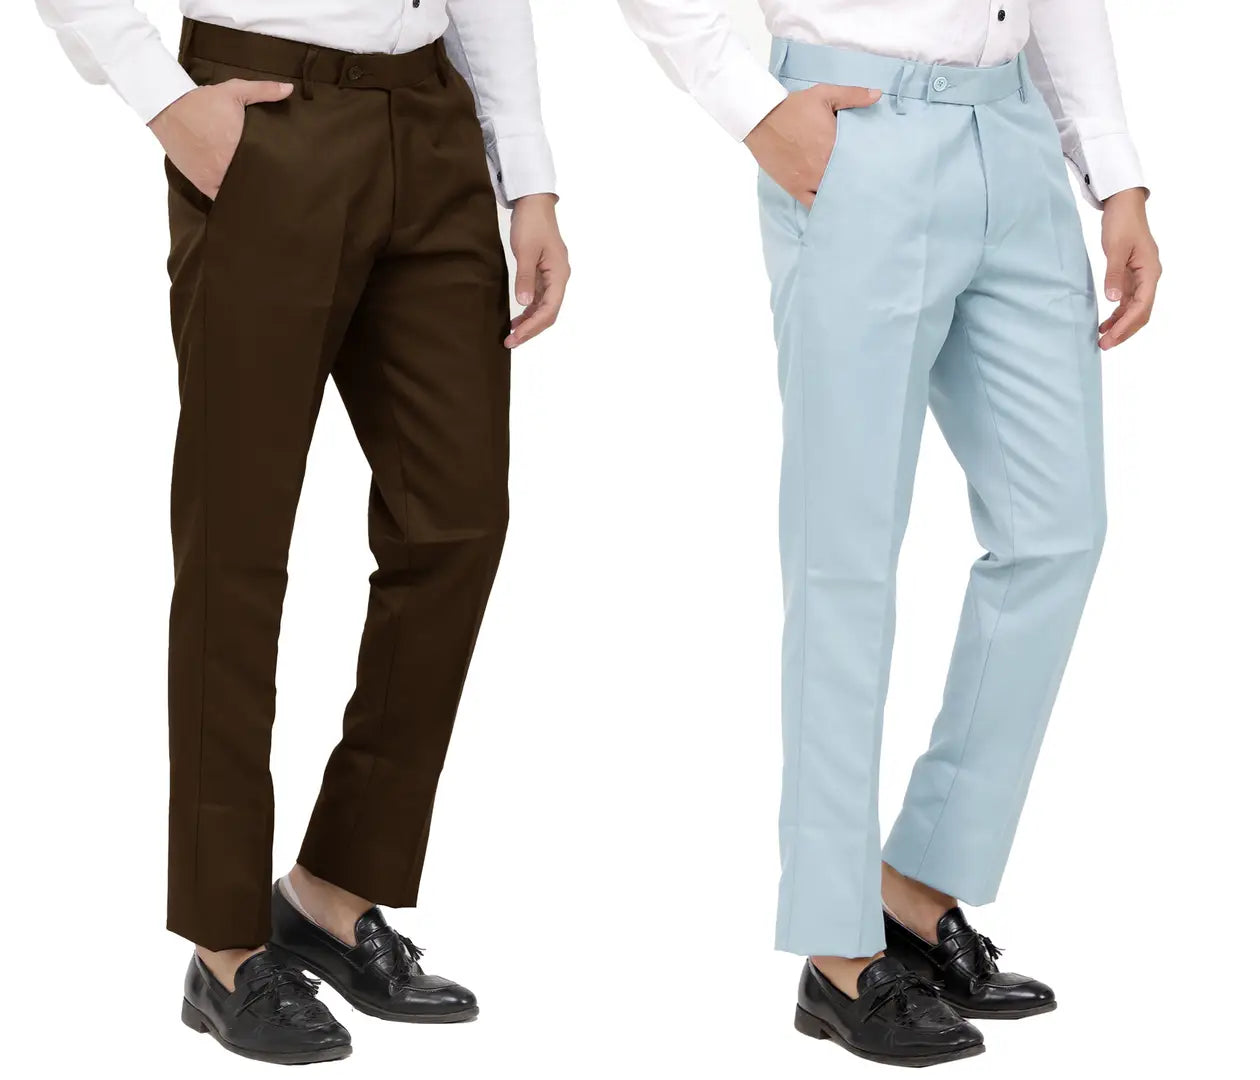 Kundan Men Poly-Viscose Blended Dark Brown and Light Sky Blue Formal Trousers ( Pack of 2 Trousers )